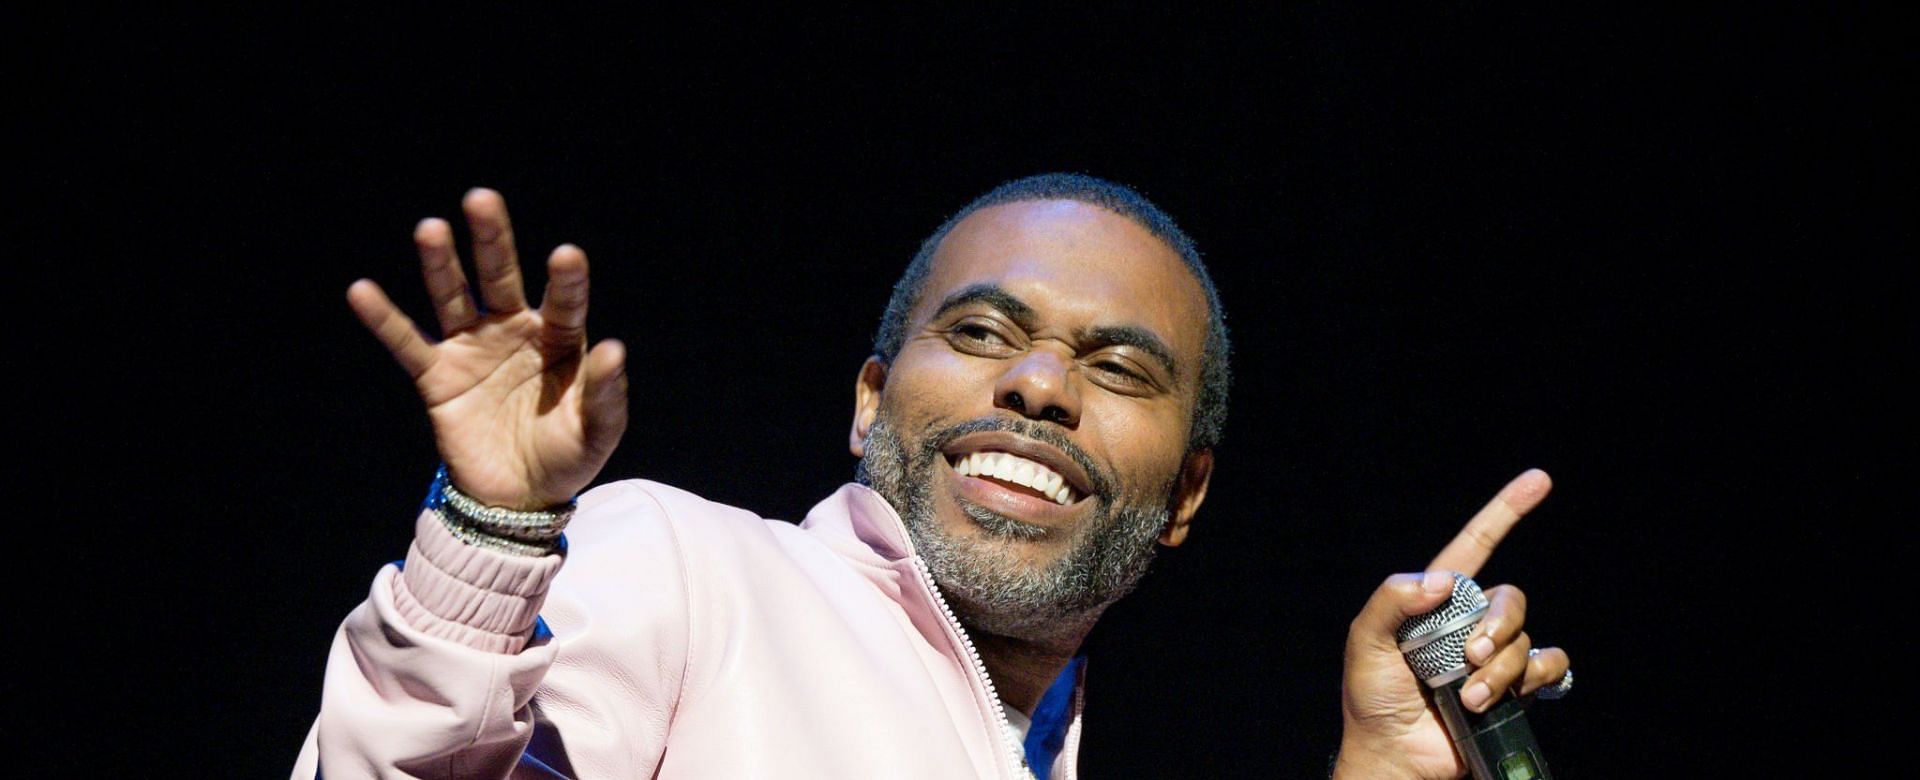 Lil Duval is a comedian and recording artist (Image via Getty Images)